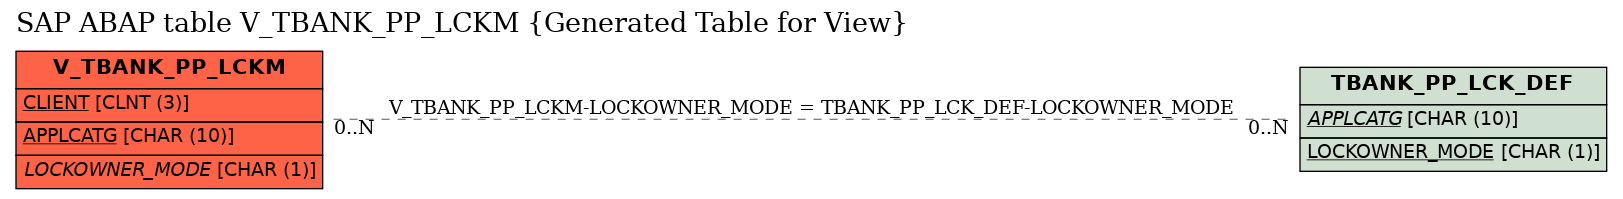 E-R Diagram for table V_TBANK_PP_LCKM (Generated Table for View)